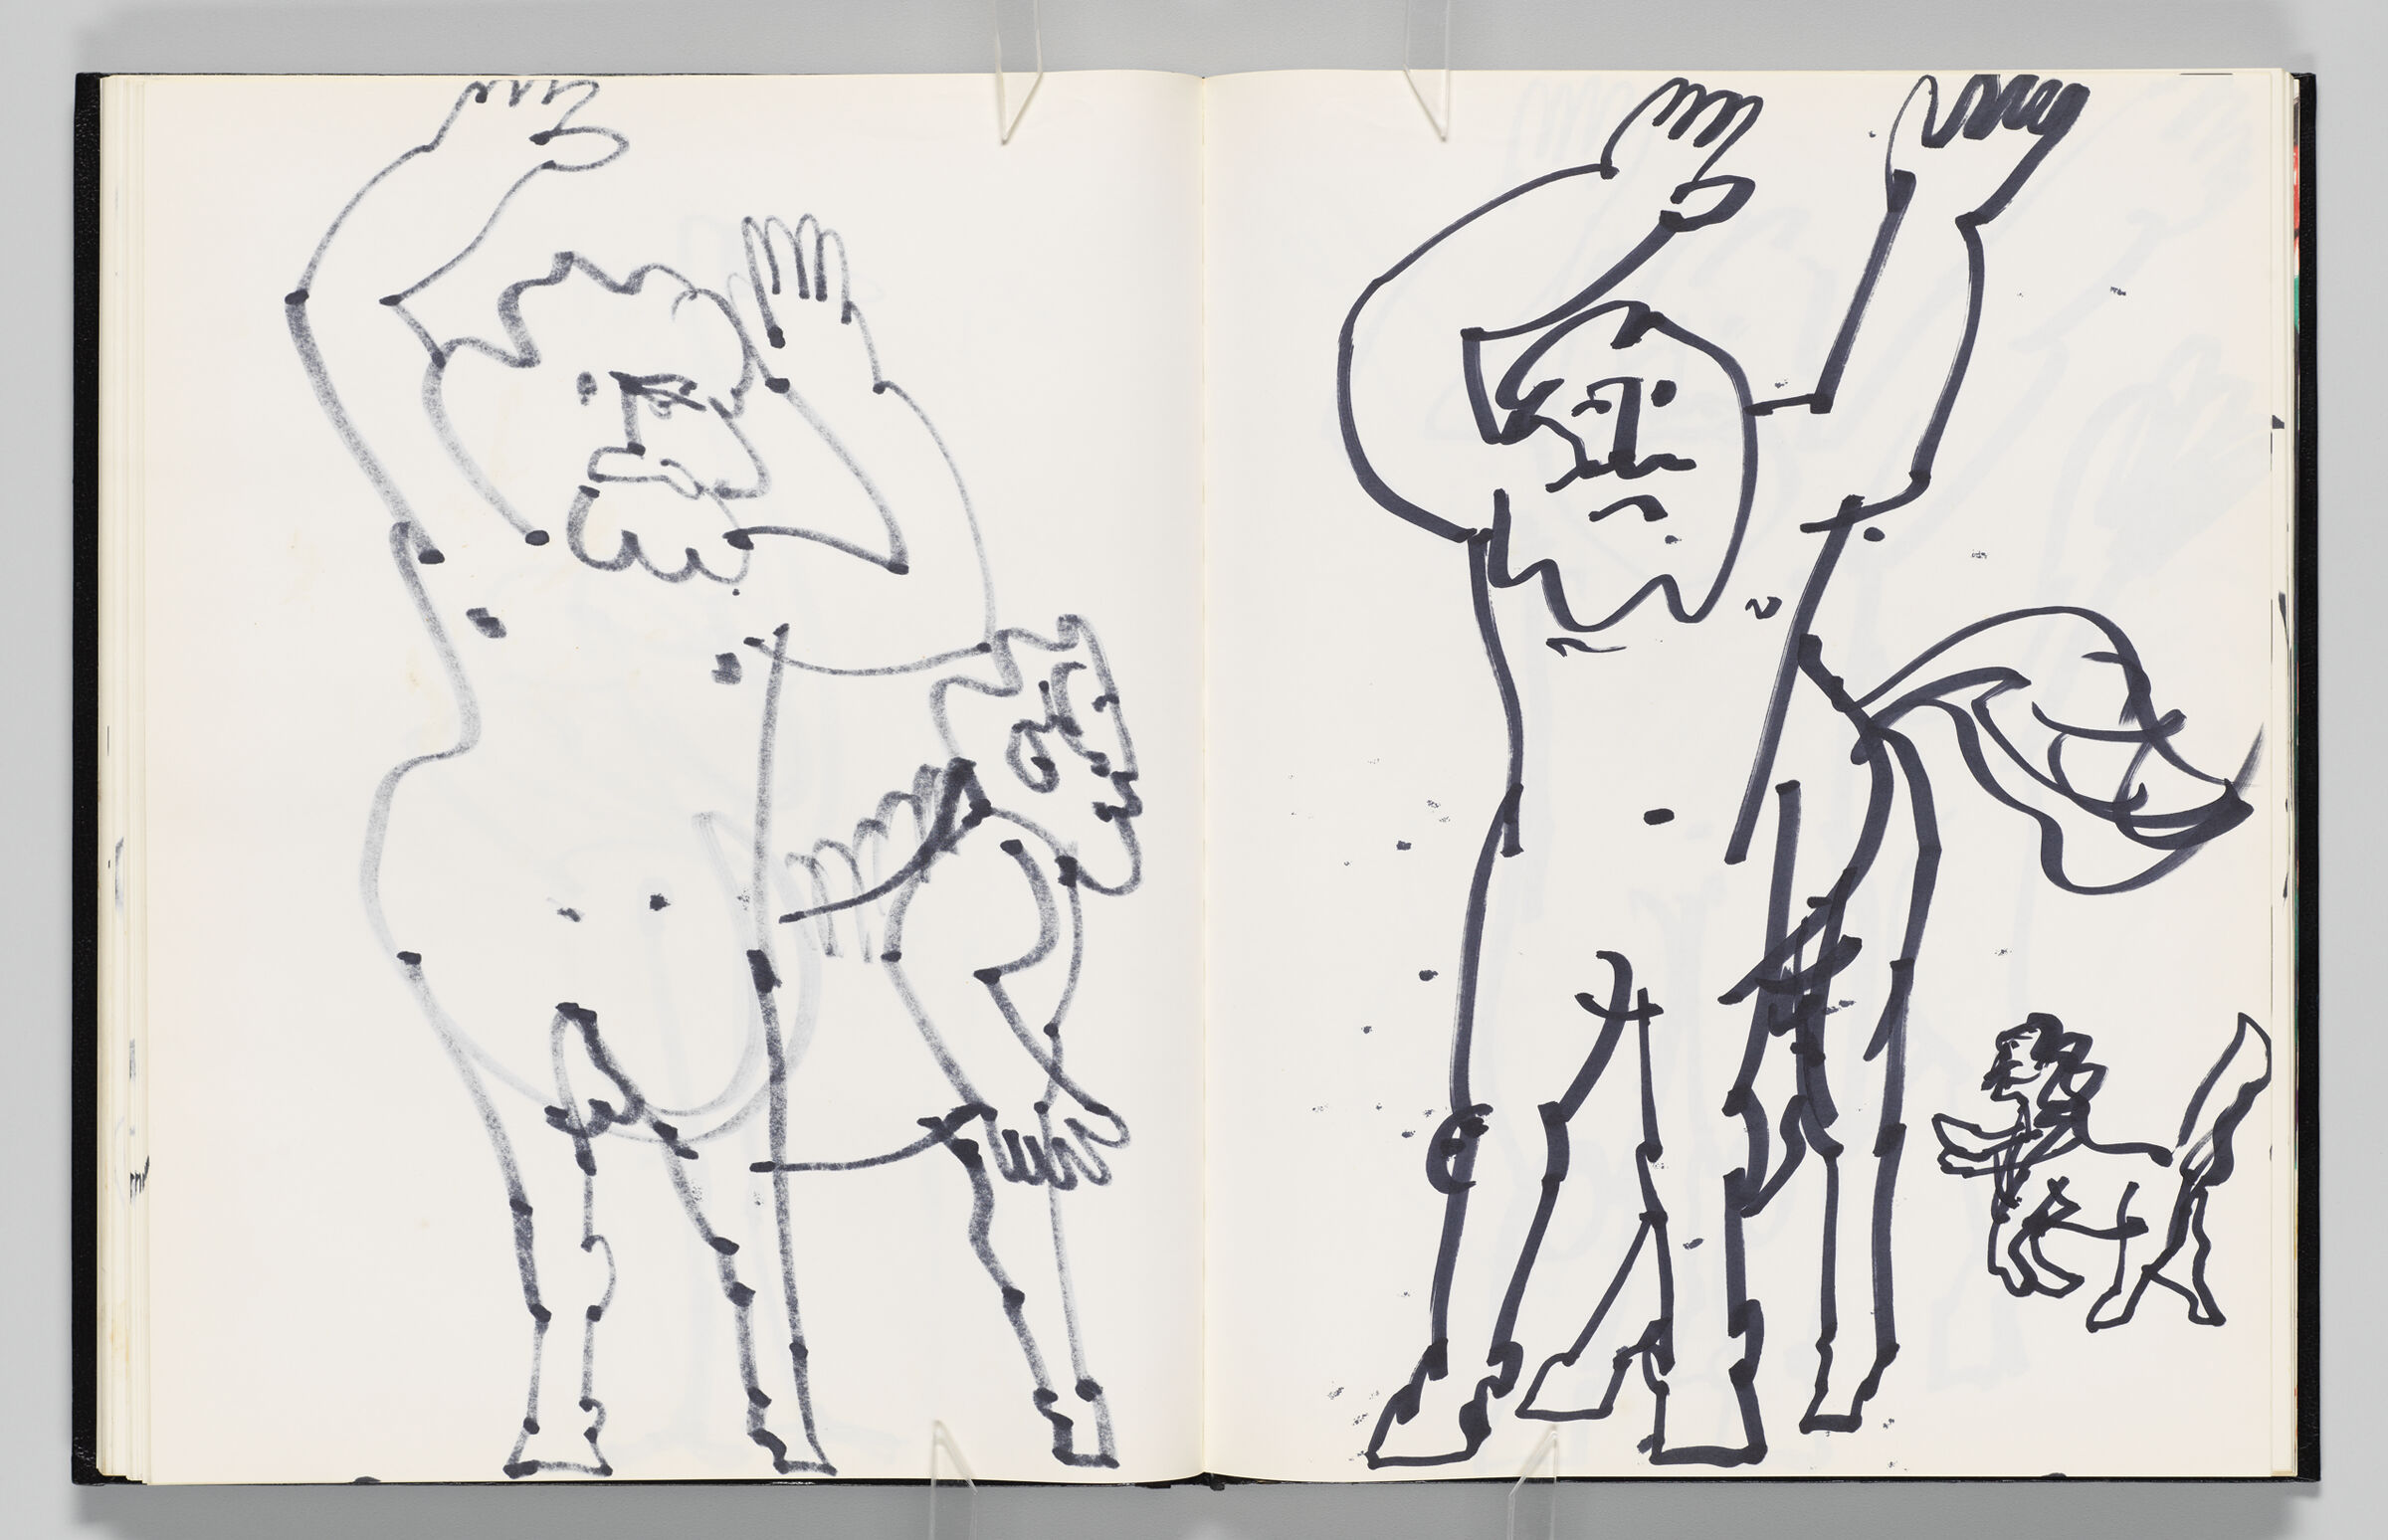 Untitled (Bleed-Through Of Previous Page, Left Page); Untitled (Centaurs, Right Page)